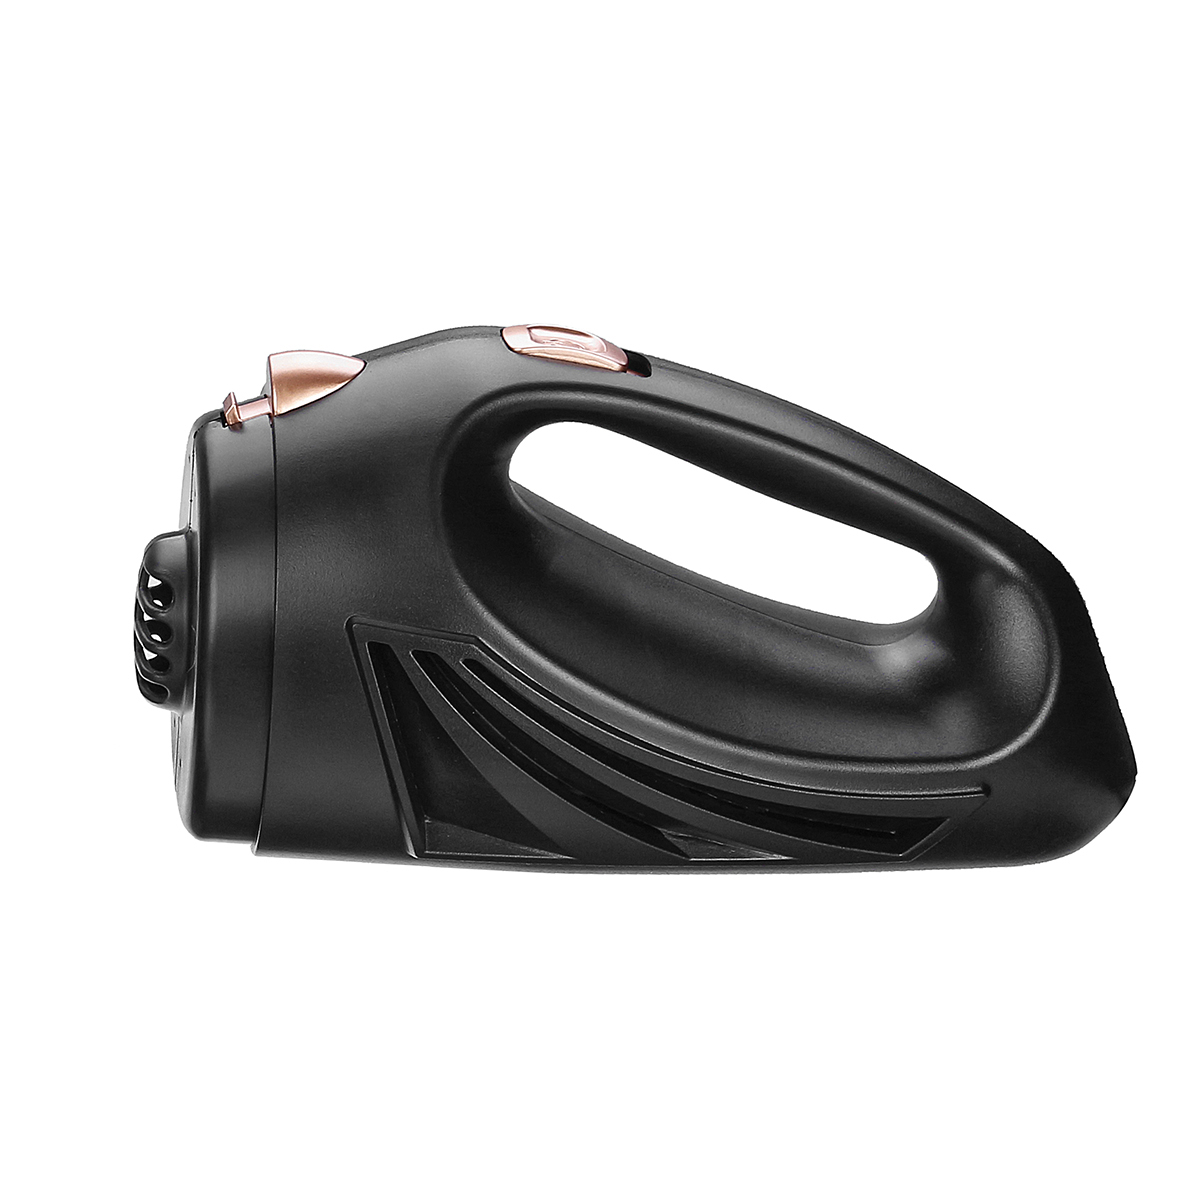 12V 90W 3000Pa Car Vacuum Cleaner Handheld Portable Duster Kit Dry and Wet Suction Hand - Auto GoShop